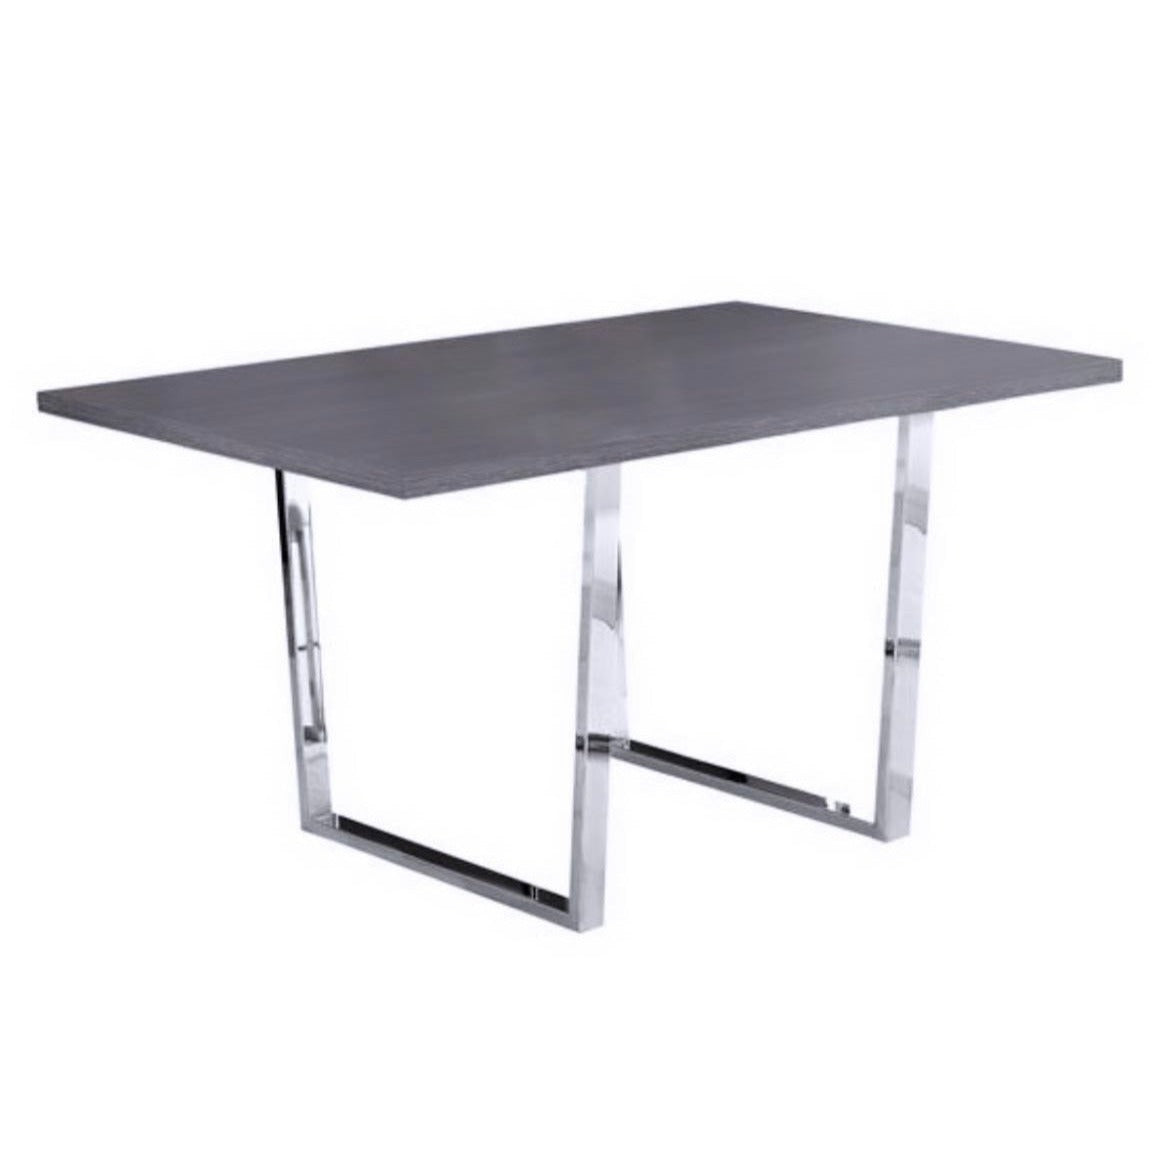 KLO GREY DINING TABLE